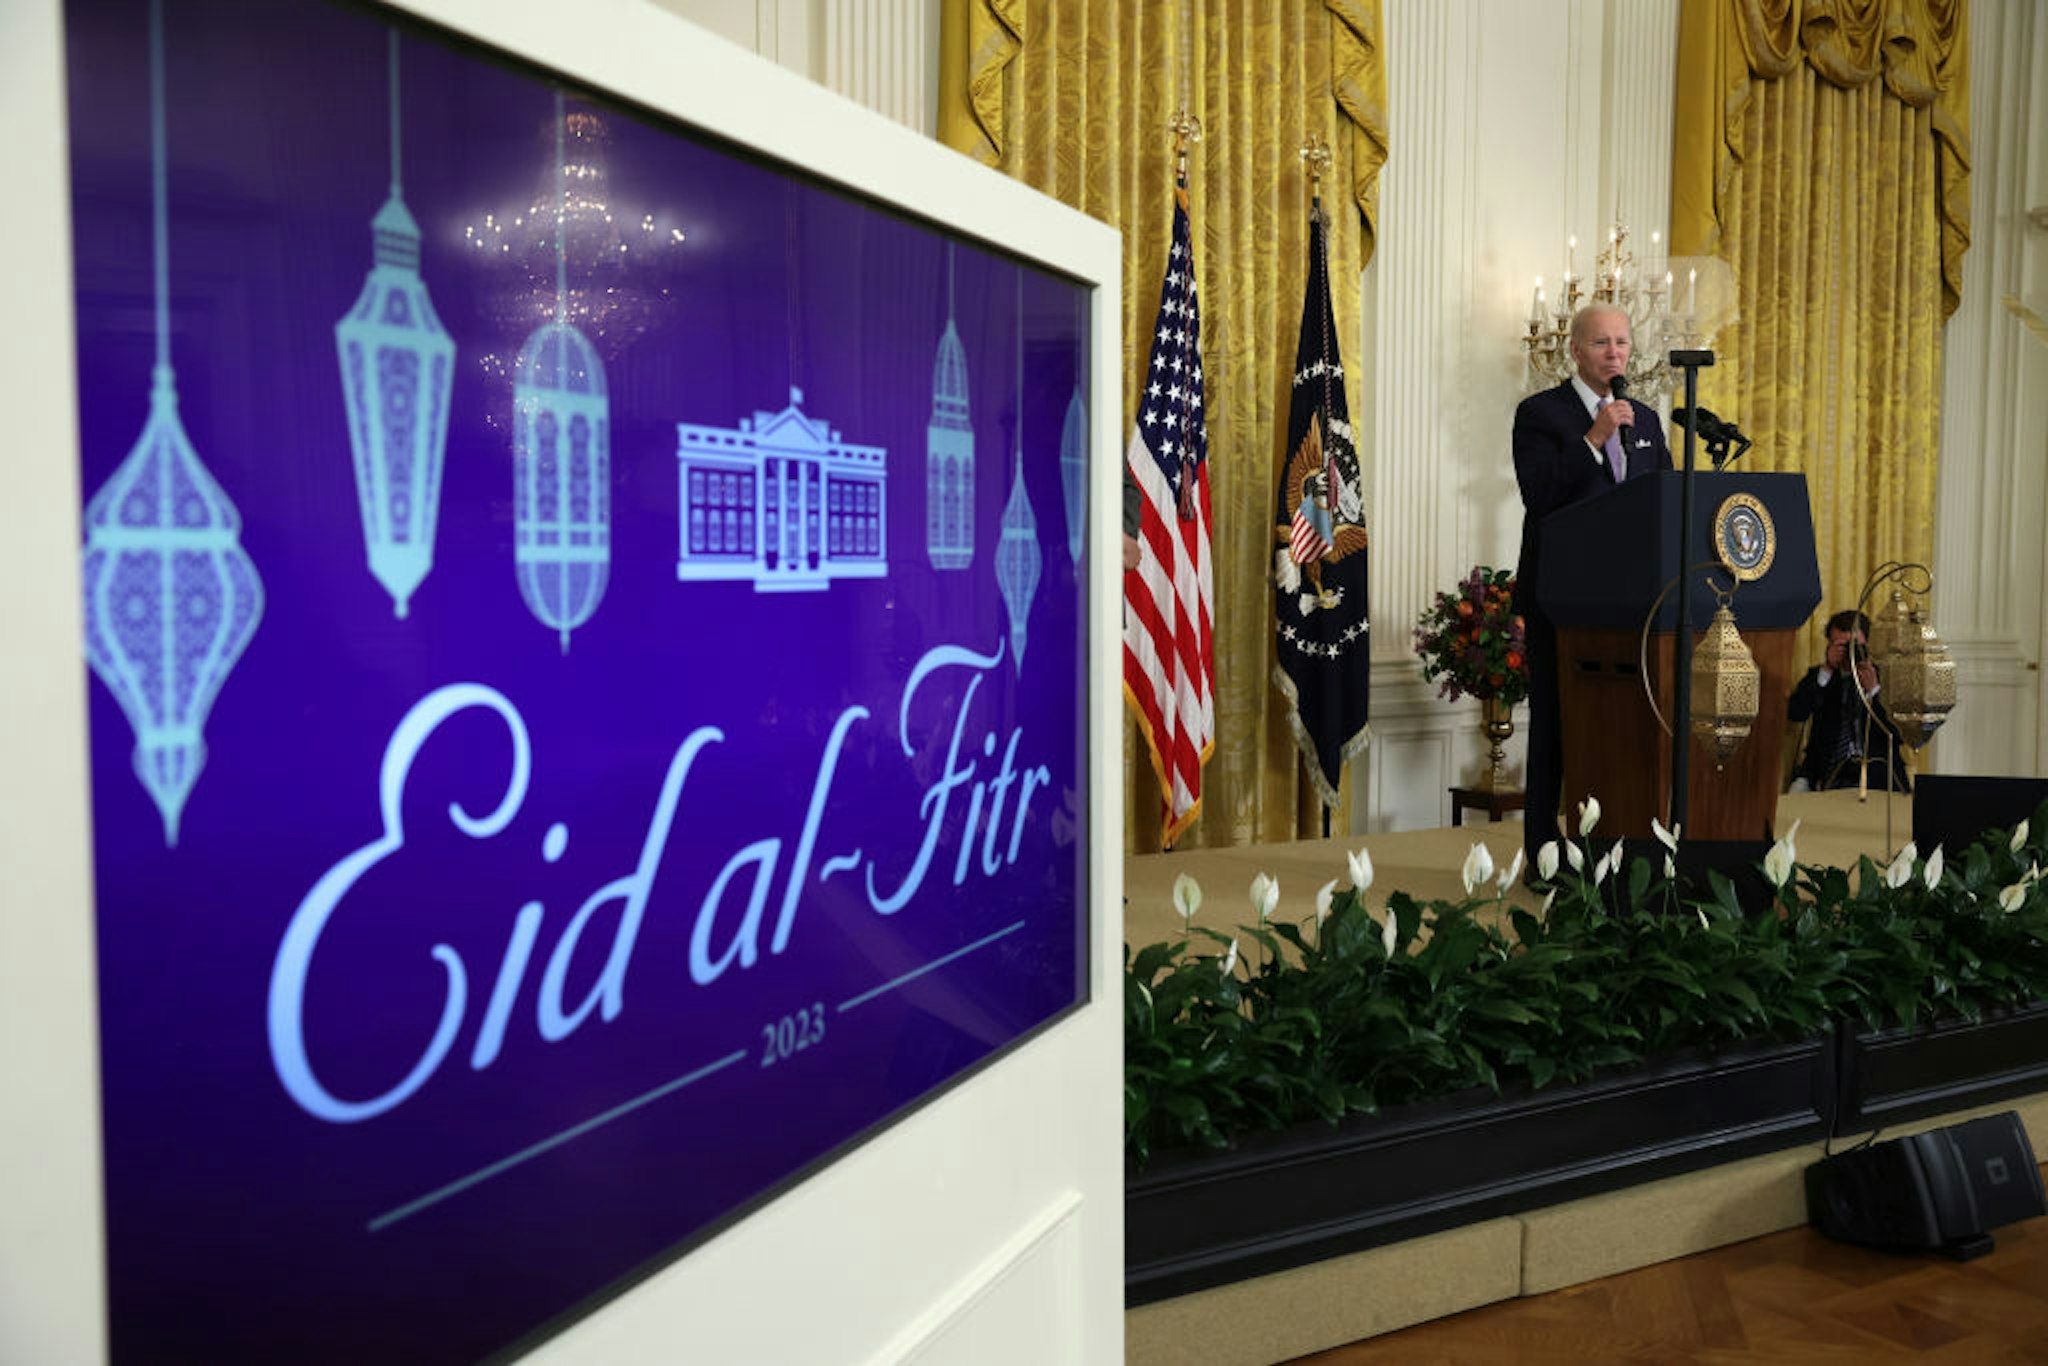 WASHINGTON, DC - MAY 01: U.S. President Joe Biden speaks during a reception celebrating Eid-al-Fitr in the East Room of the White House on May 1, 2023 in Washington, DC. The White House hosted the event to mark Eid al-Fitr, which is celebrated by Muslims worldwide for the end of the month-long Ramadan. (Photo by Alex Wong/Getty Images)